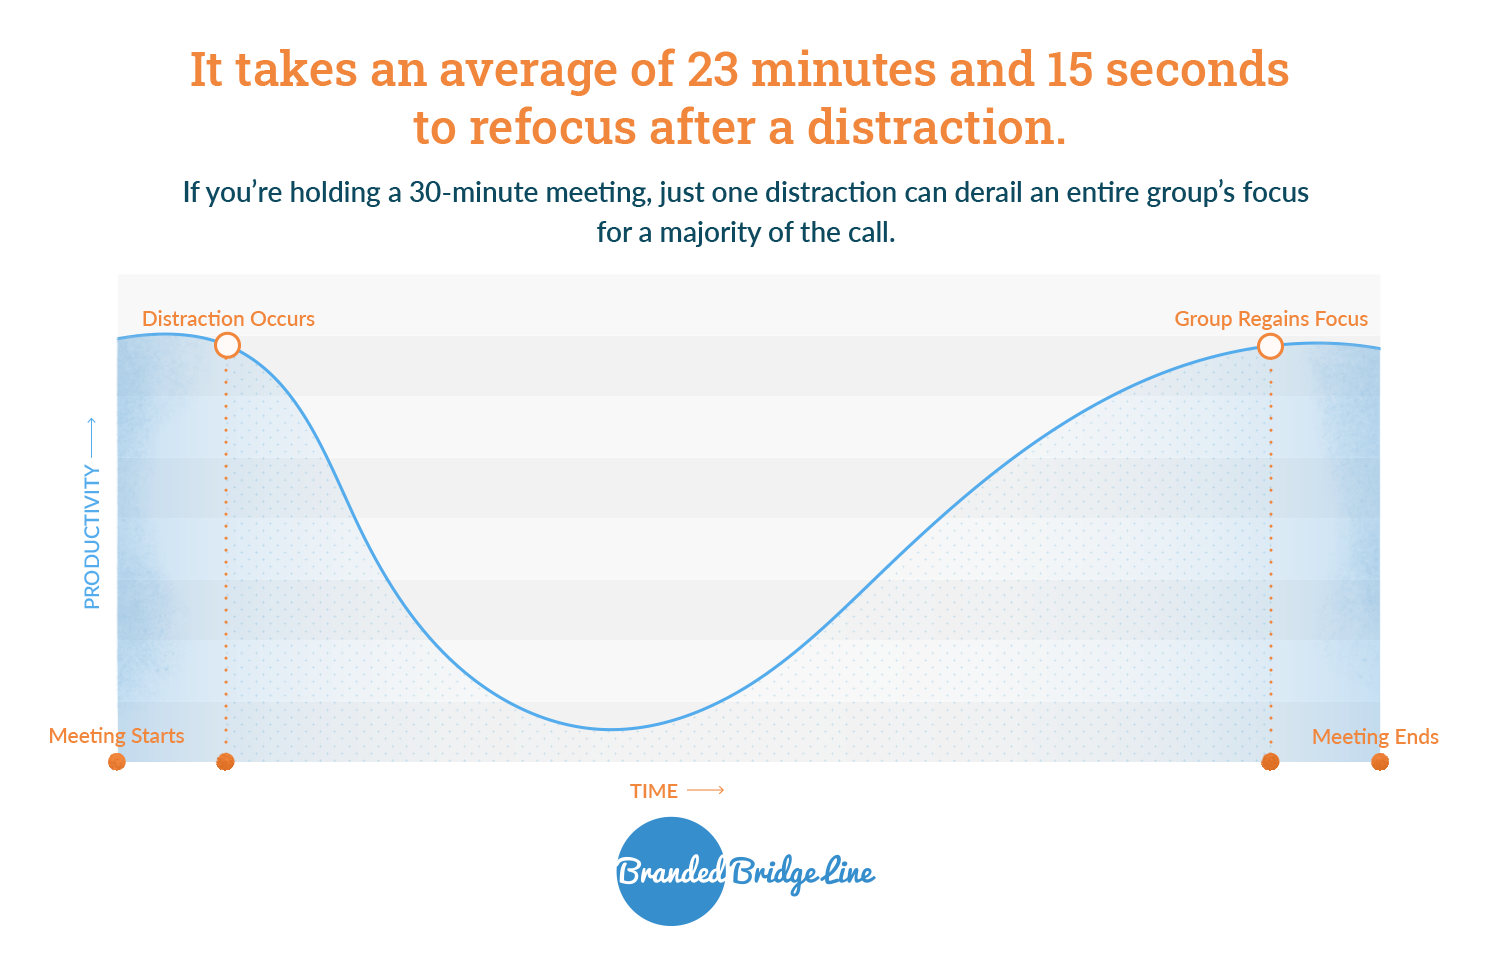 Line graph showing how just one distraction can completely derail the productivity in a 30-minute meeting